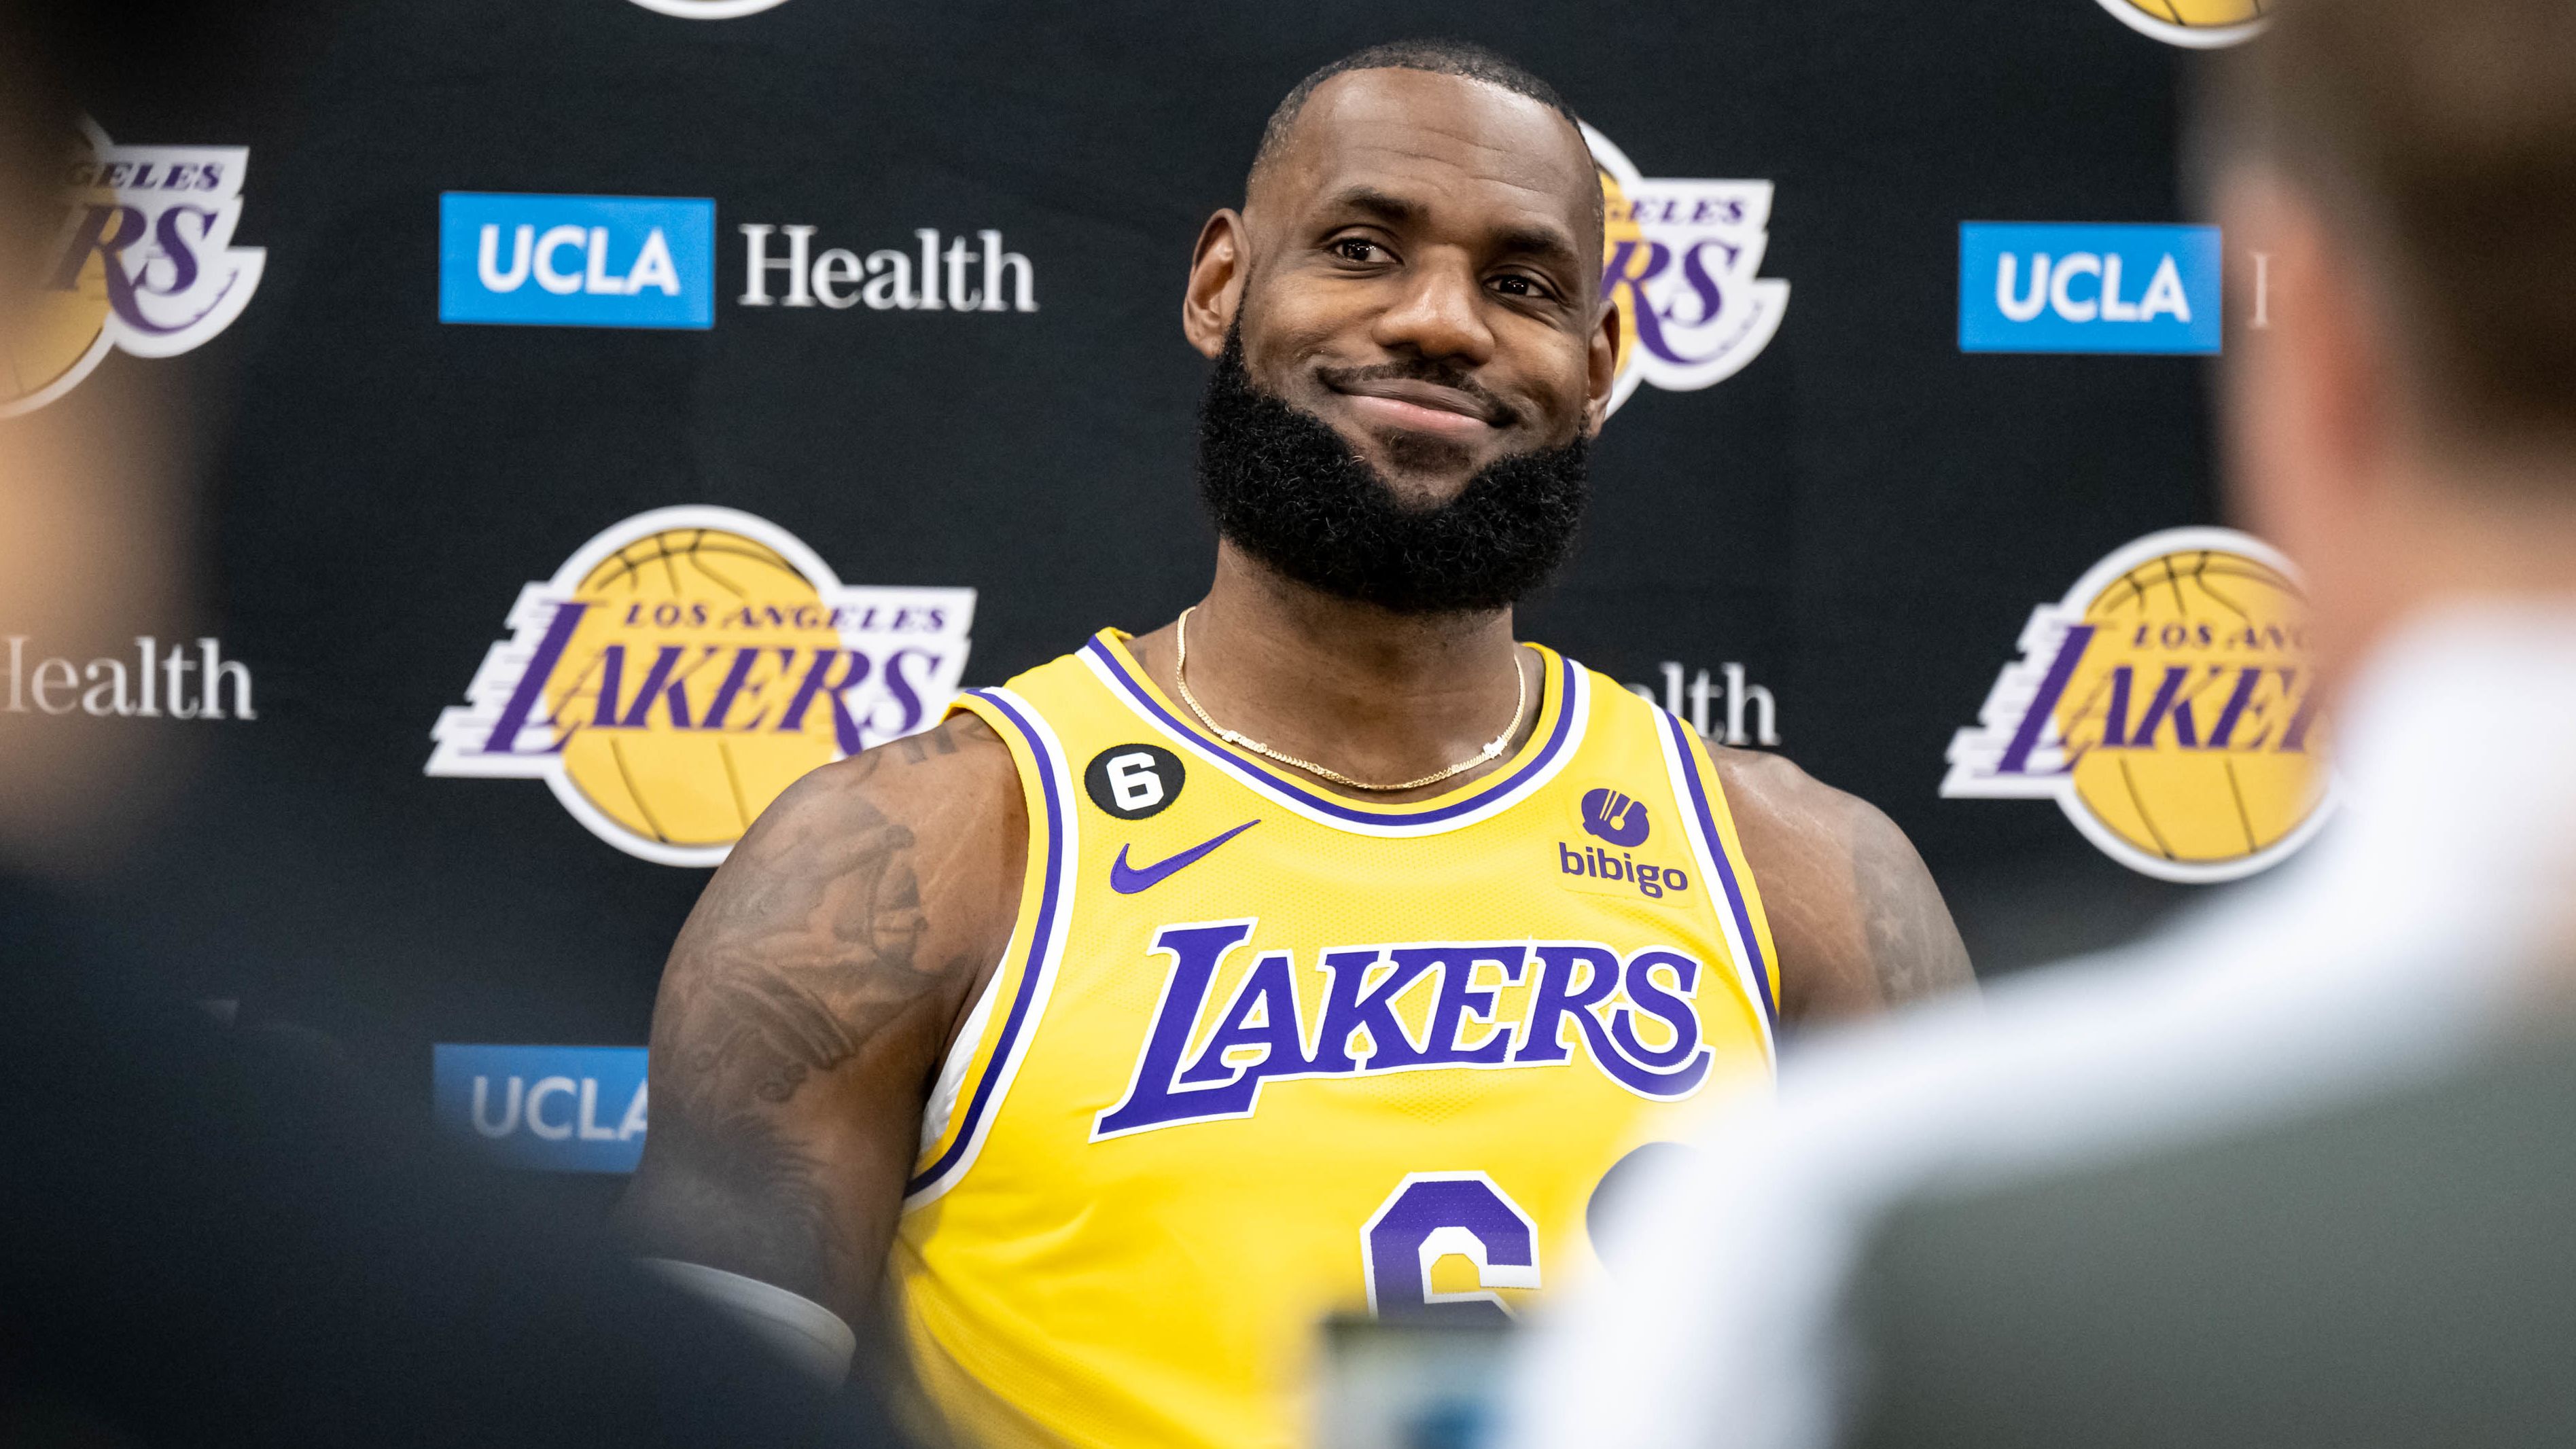 LeBron James answers questions from the media at the 2022 Media day at the UCLA Health Training Center in El Segundo Monday, September 26, 2022.